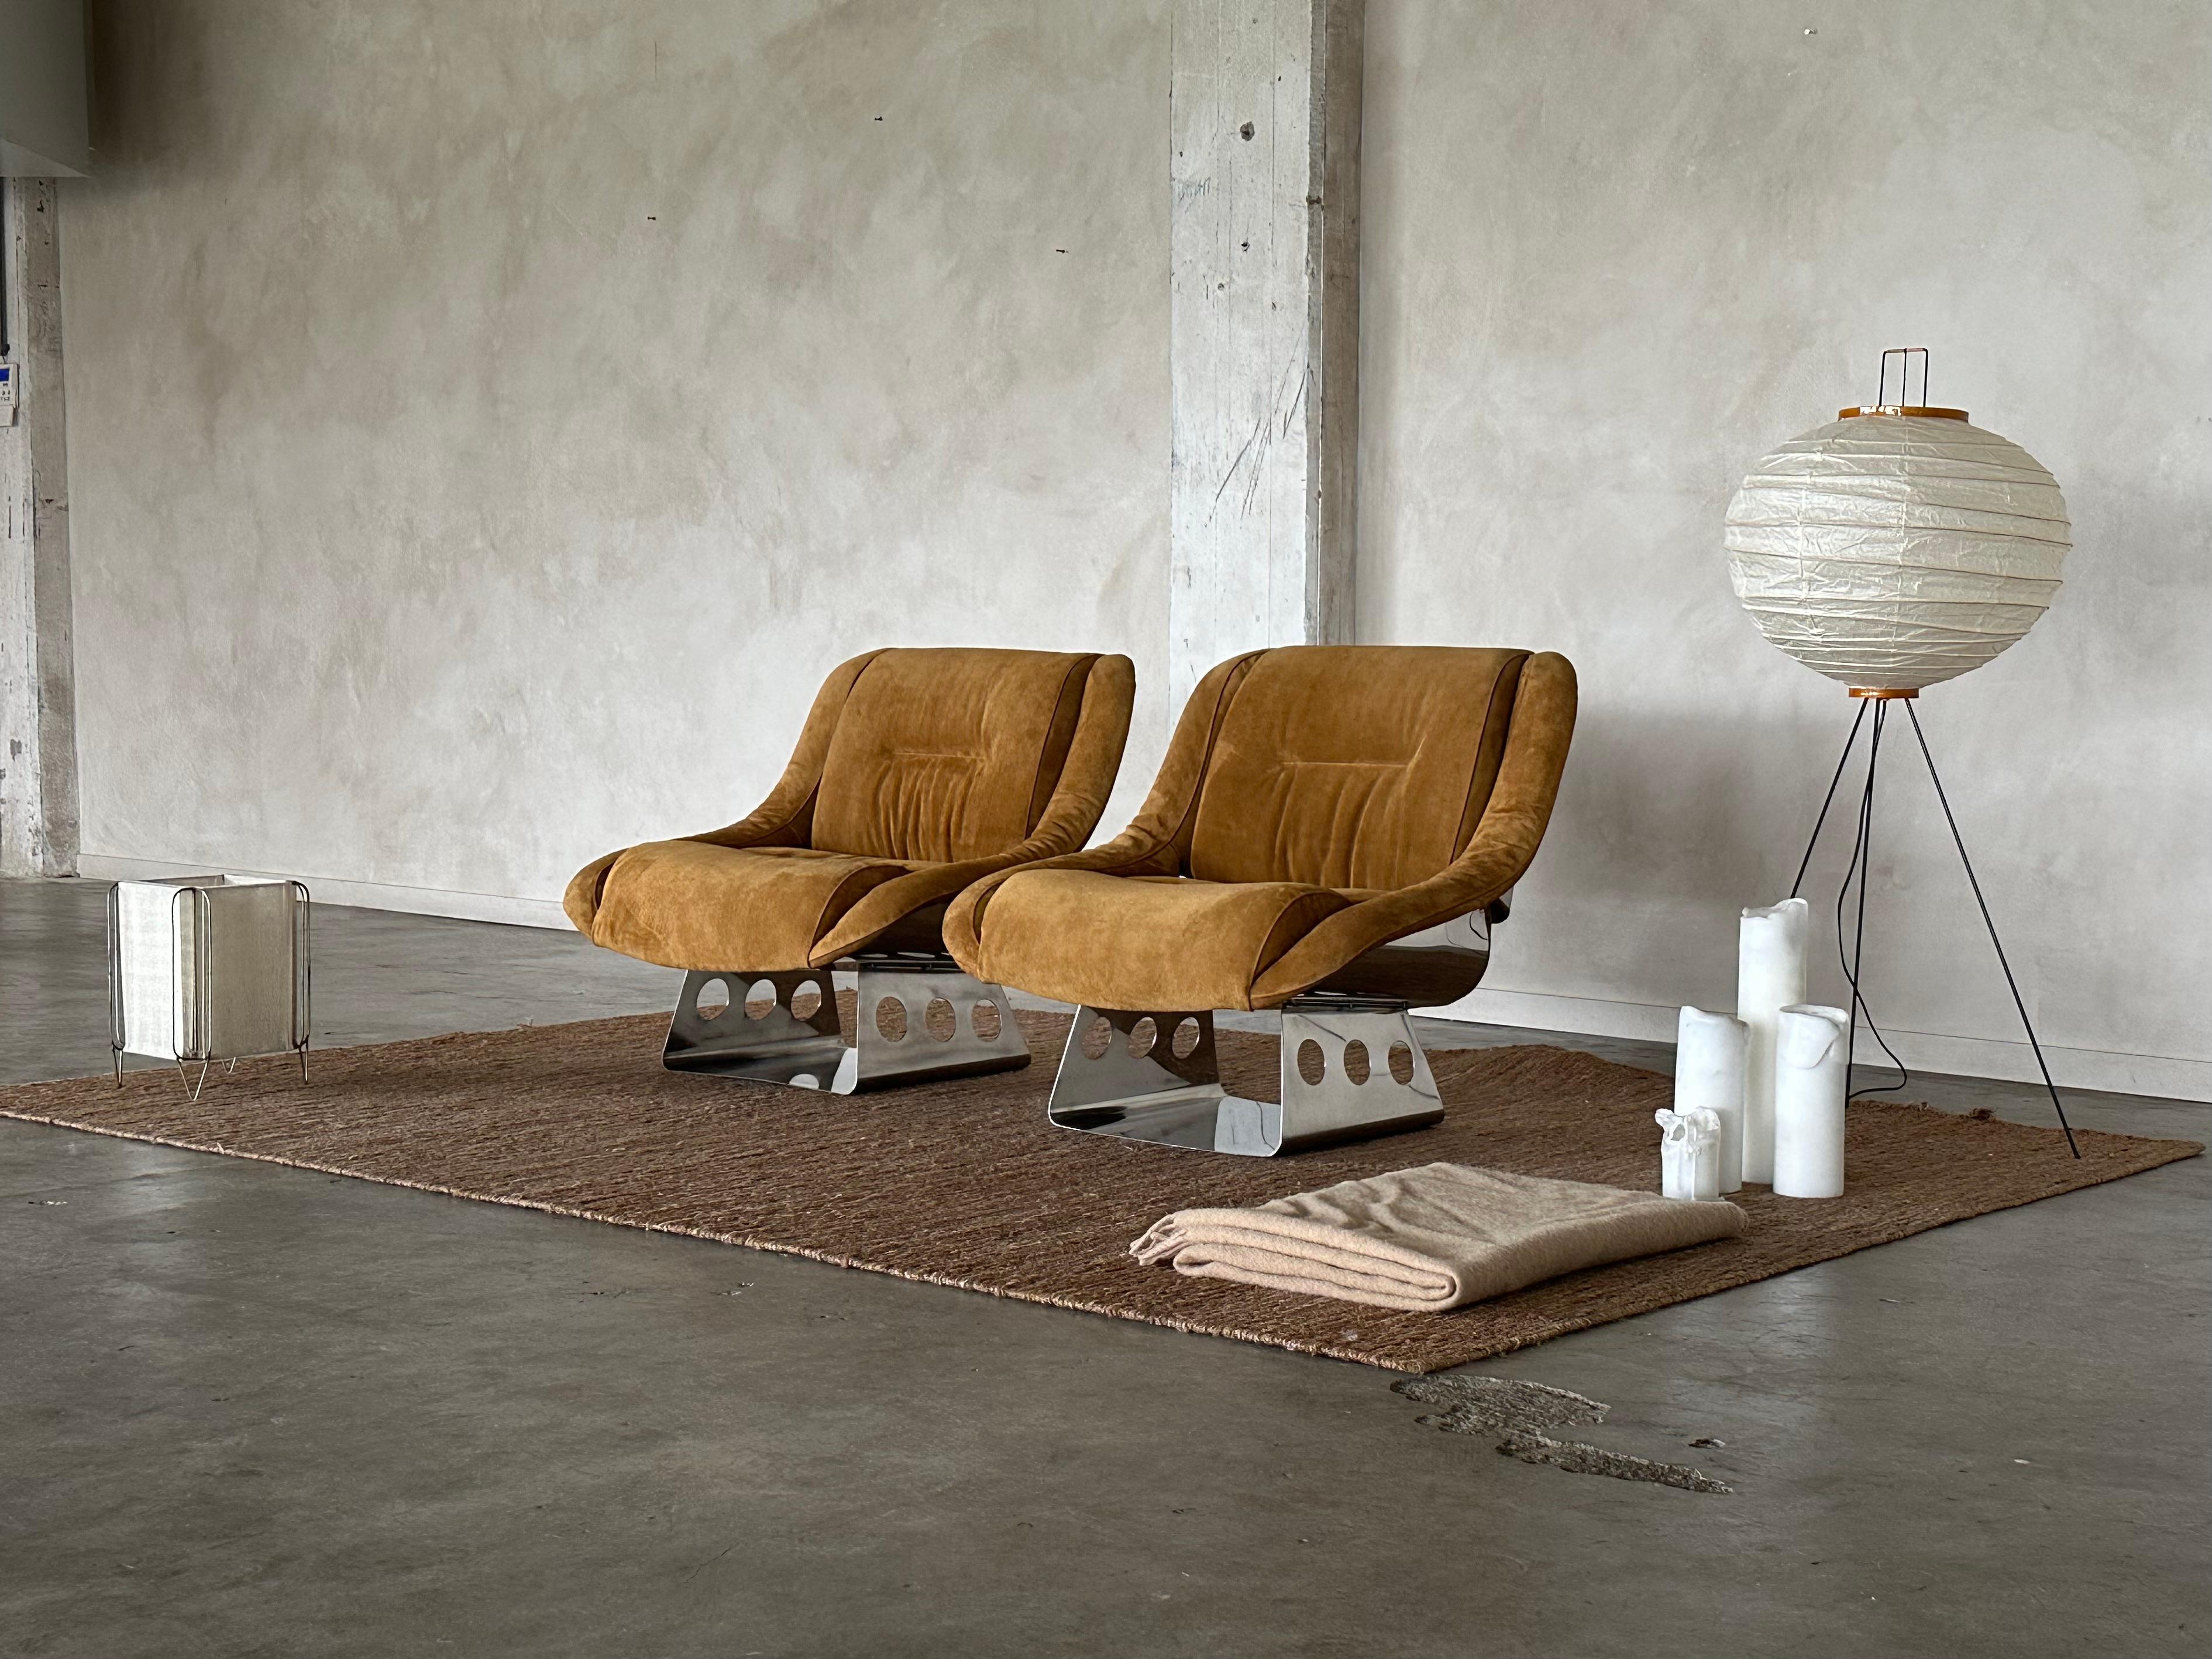 Rare Suede and Stainless Steel Lounge Chairs by Rima Padova, 1974 For Sale 7